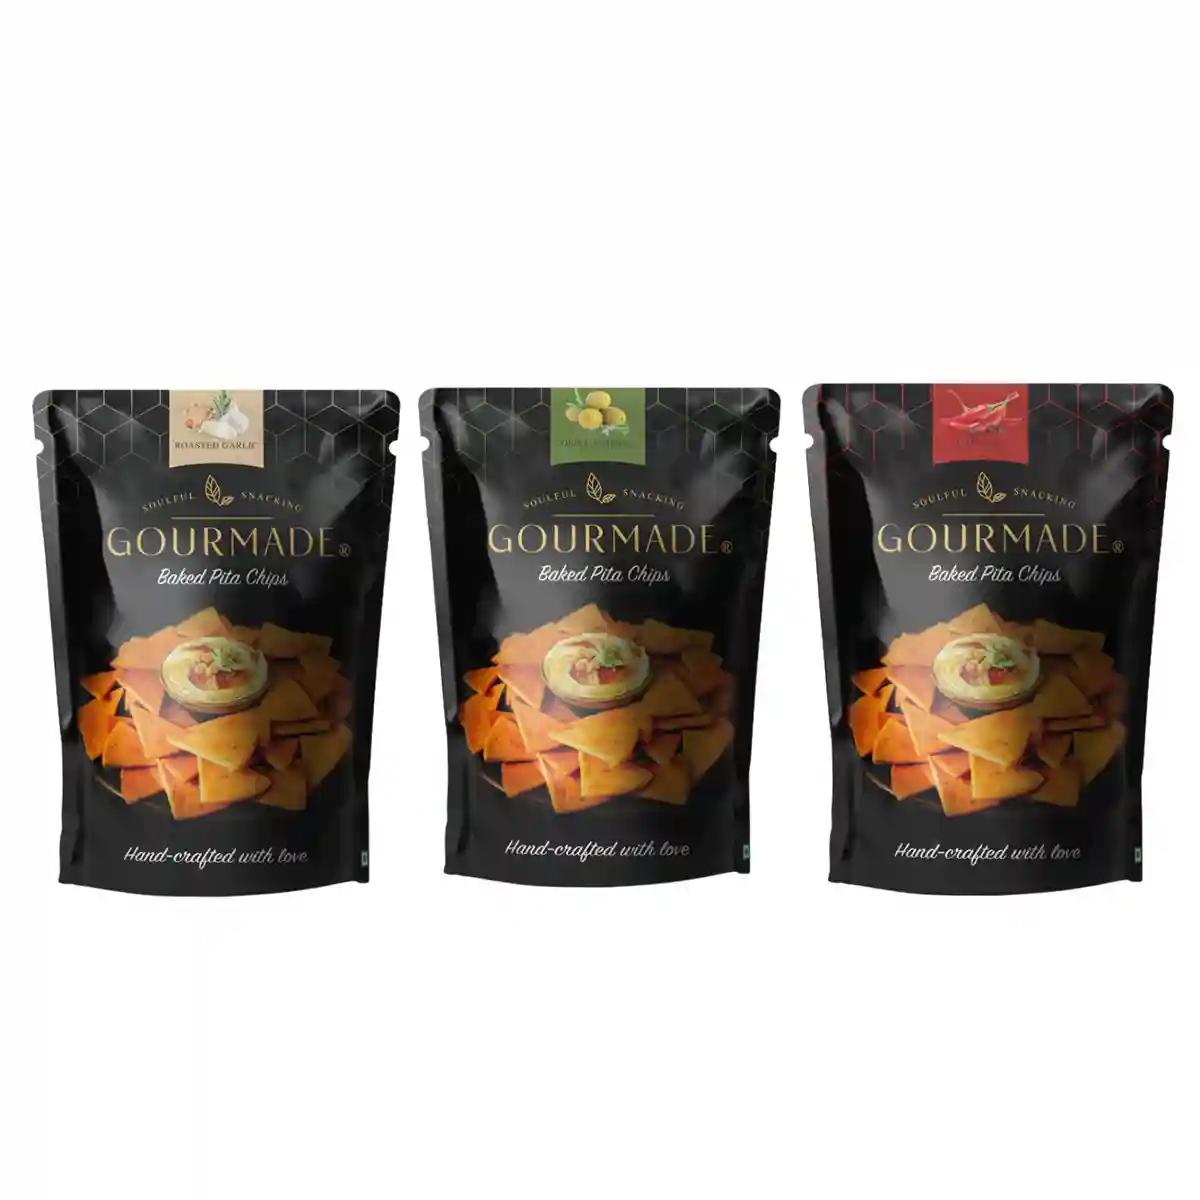 Gourmade Pita Chips Snacking Combo of Chipotle, Roasted Garlic, Olive & Herbs (375gm)